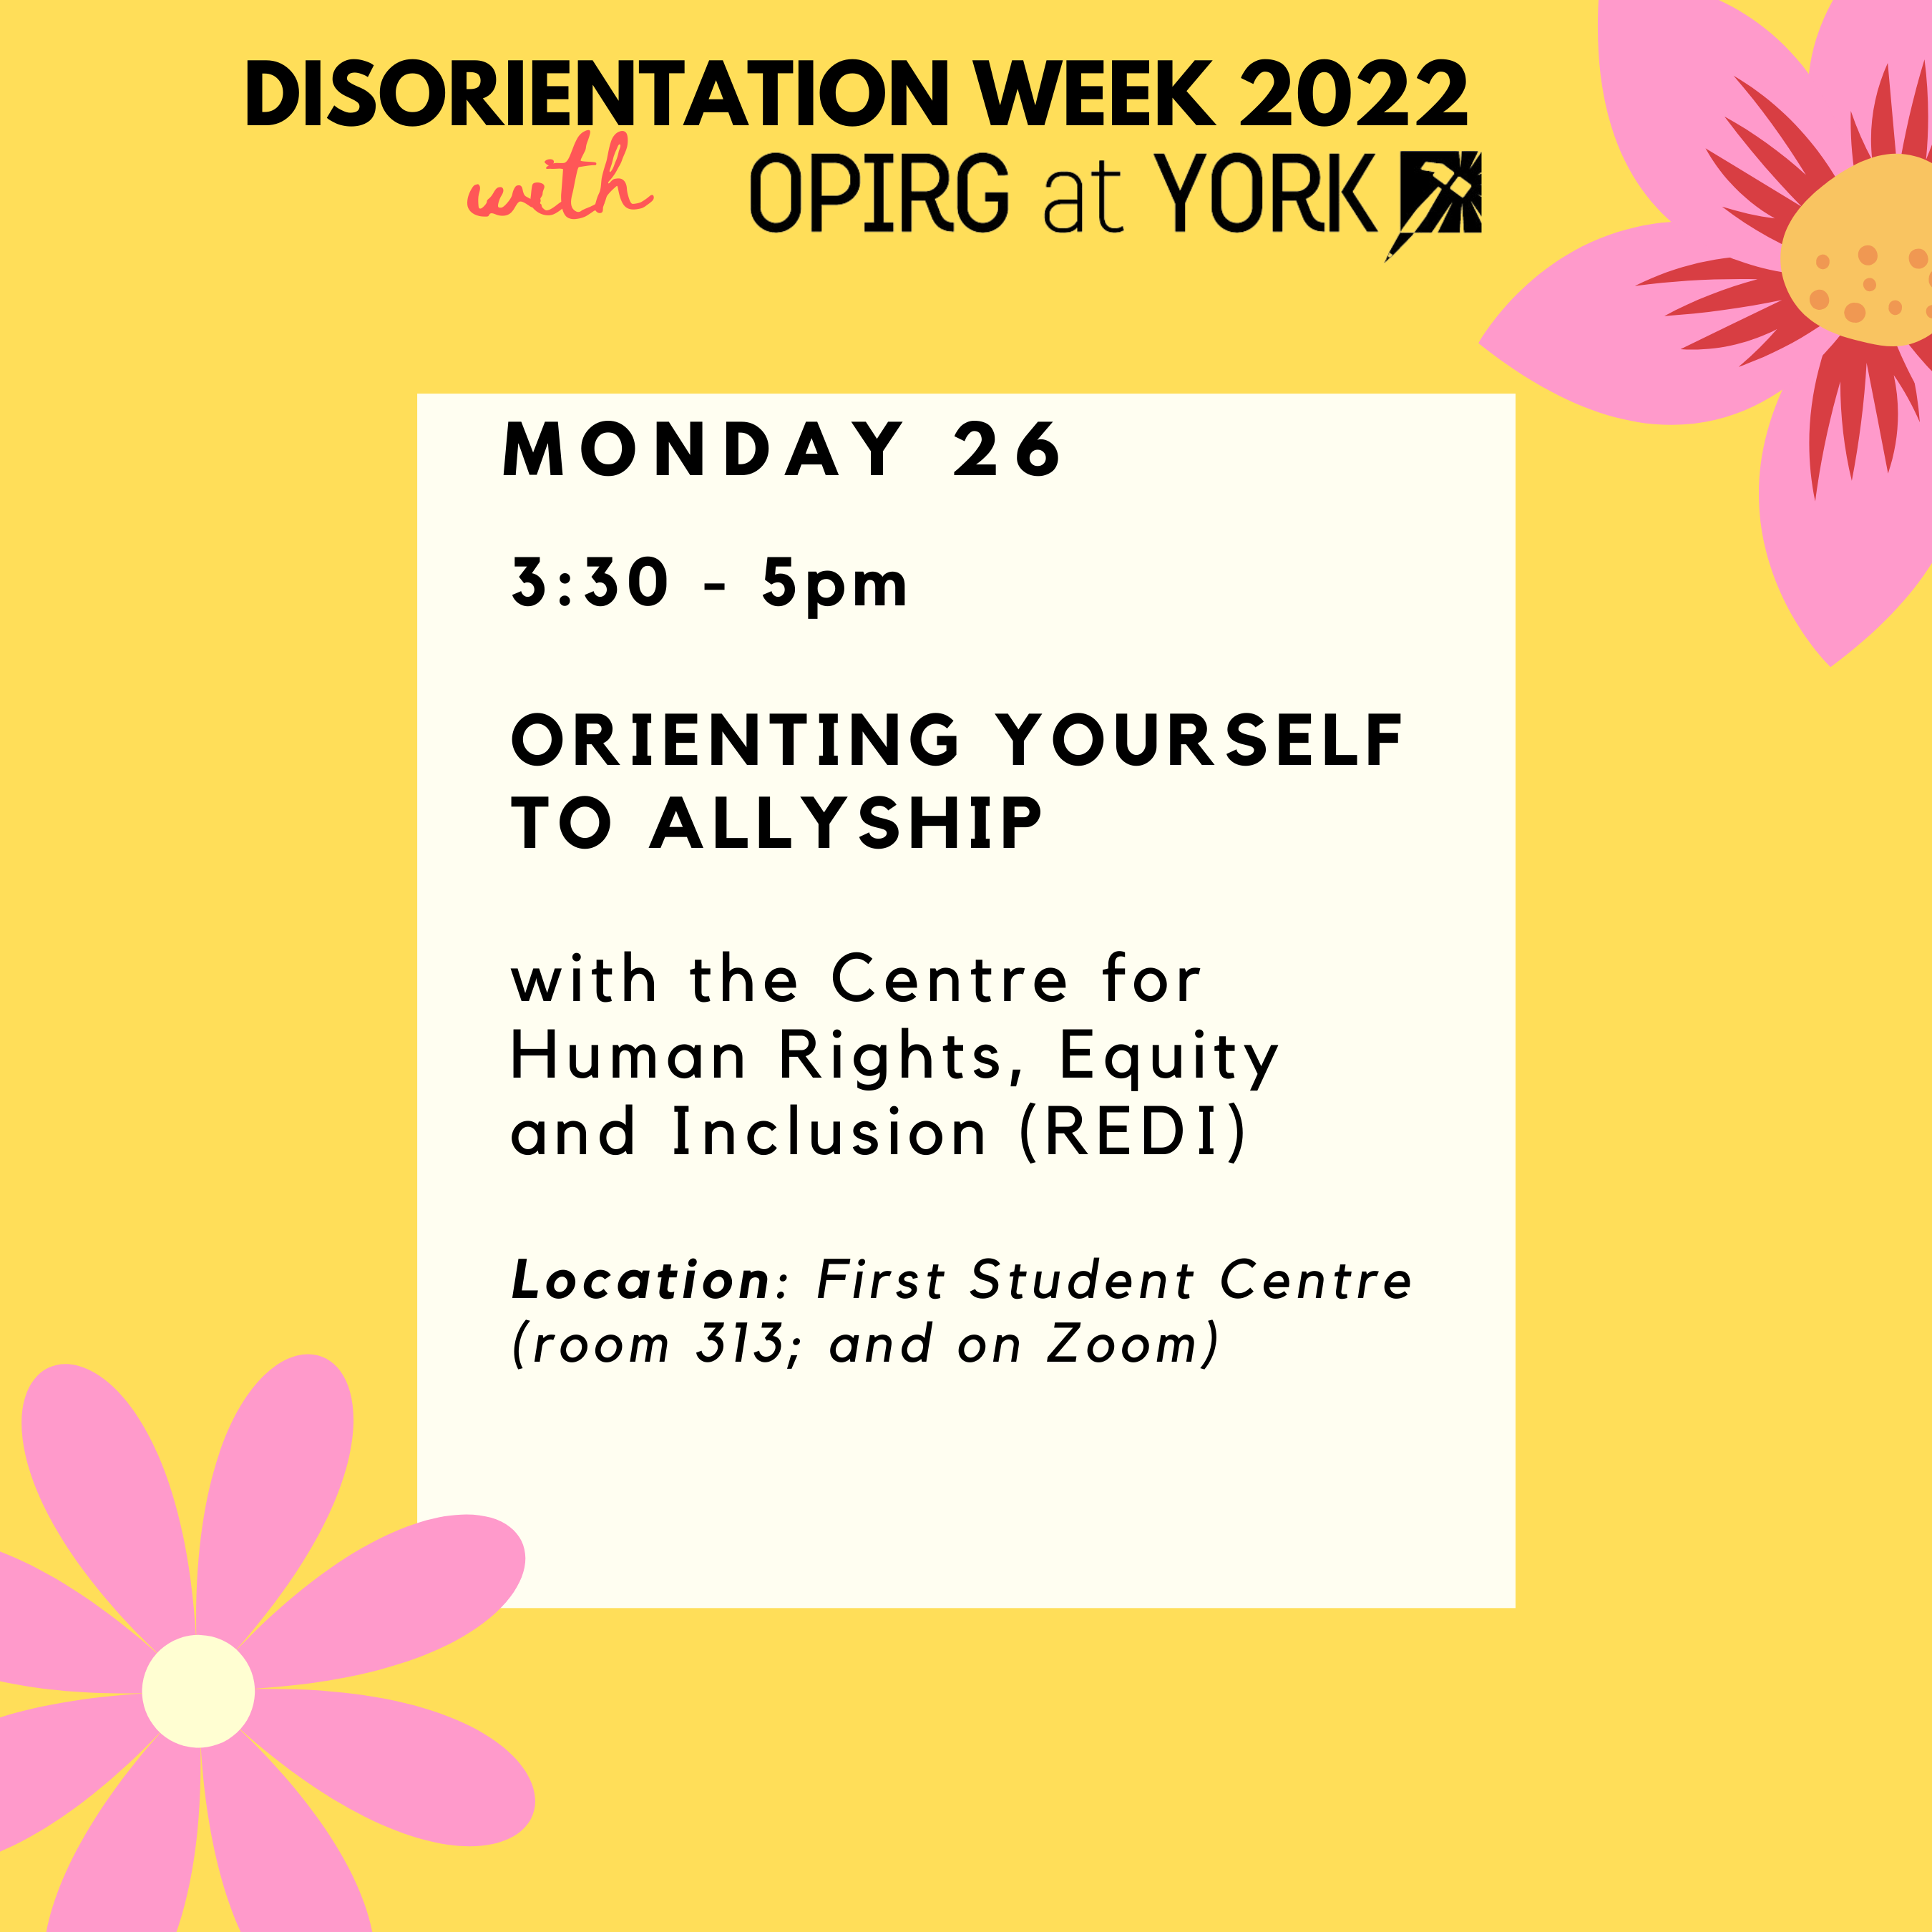 Monday 26/ 3:30 - 5pm Orienting yourself to Allyship with the Centre for Human Rights, Equity and Inclusion (REDI) Location: First Student Centre (room 313; and on Zoom) / Black text on white block with yellow border. Pink flowers in the corners.